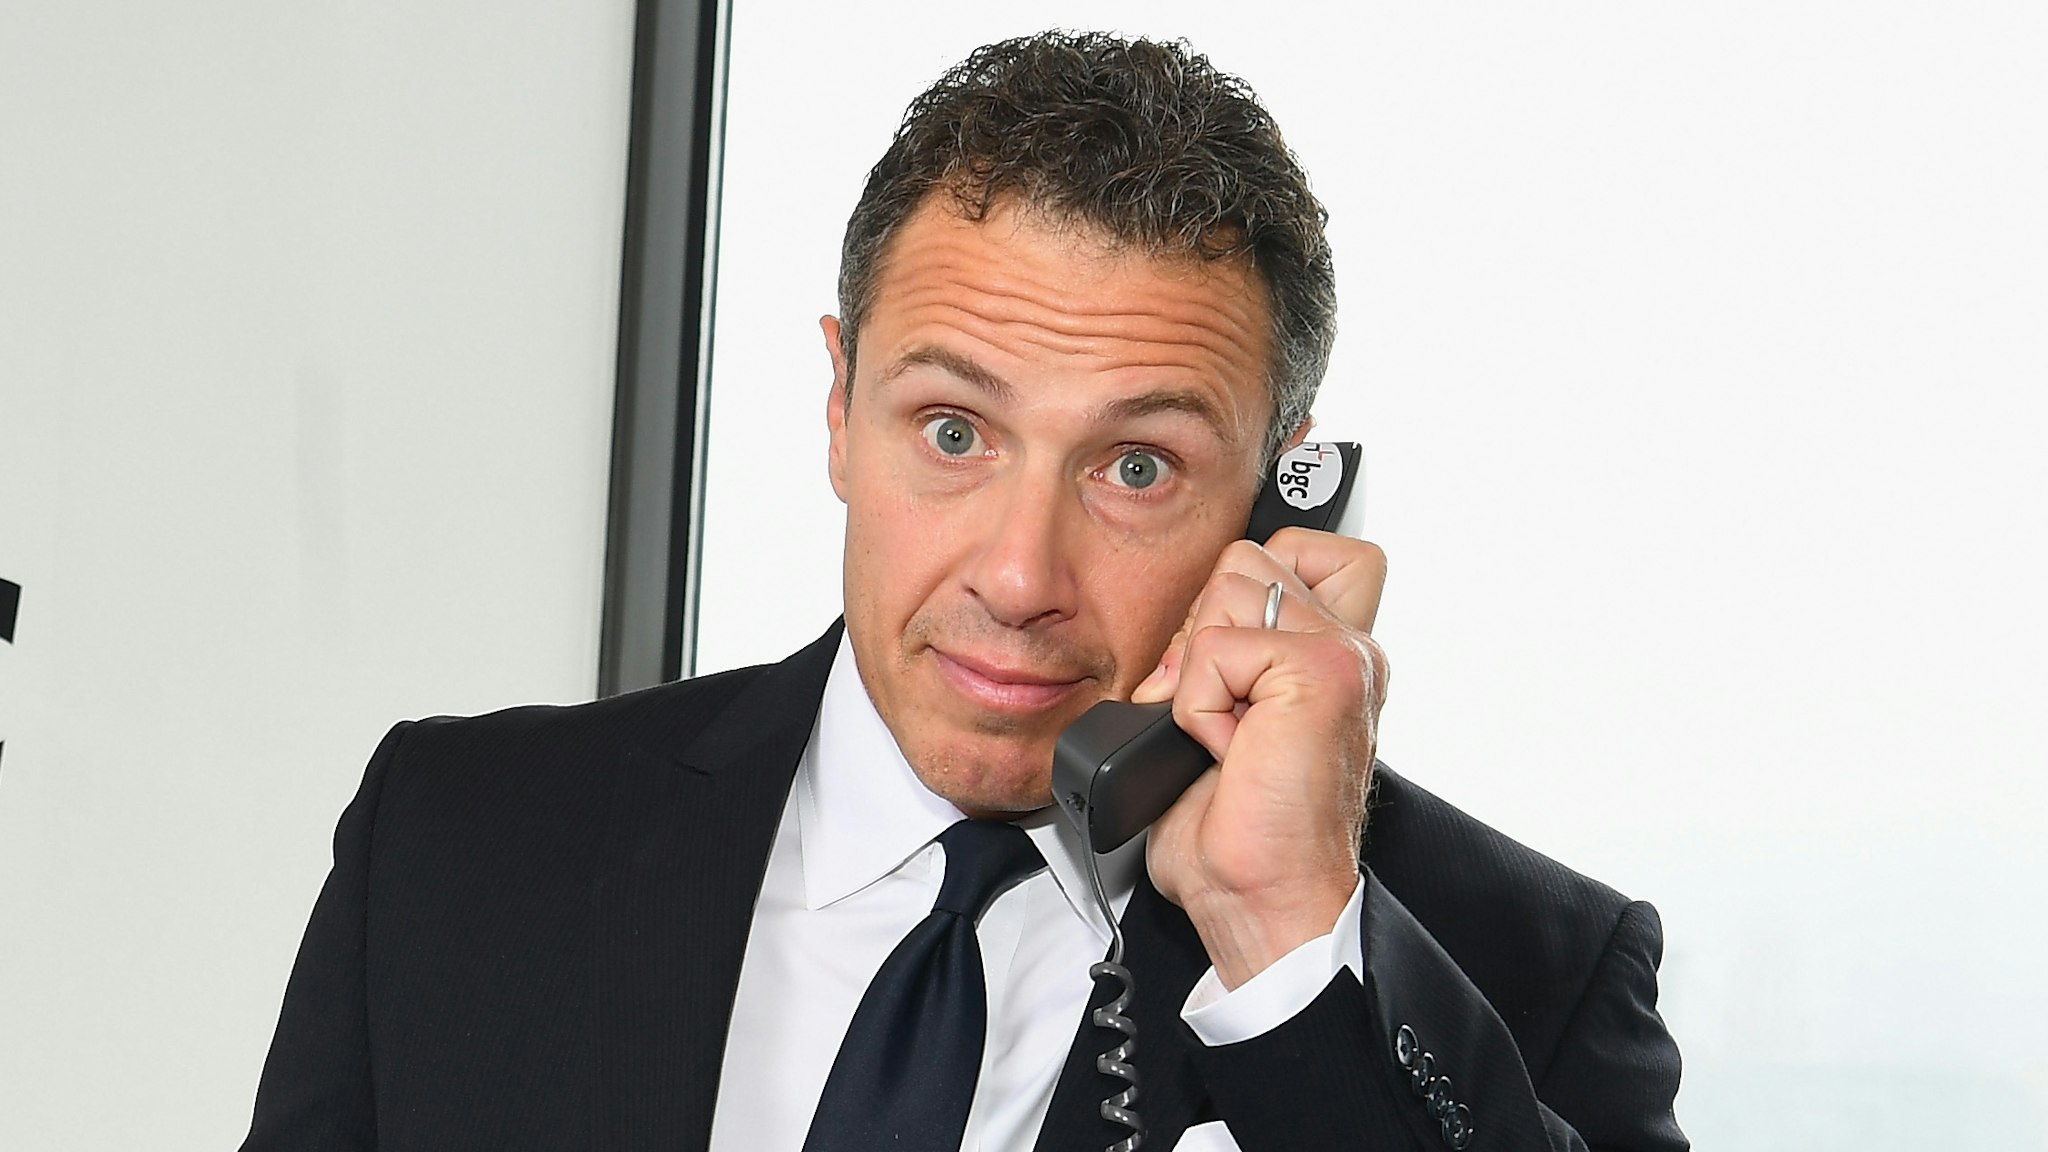 Chris Cuomo attends Annual Charity Day hosted by Cantor Fitzgerald, BGC and GFI at BGC Partners, INC on September 11, 2018 in New York City.